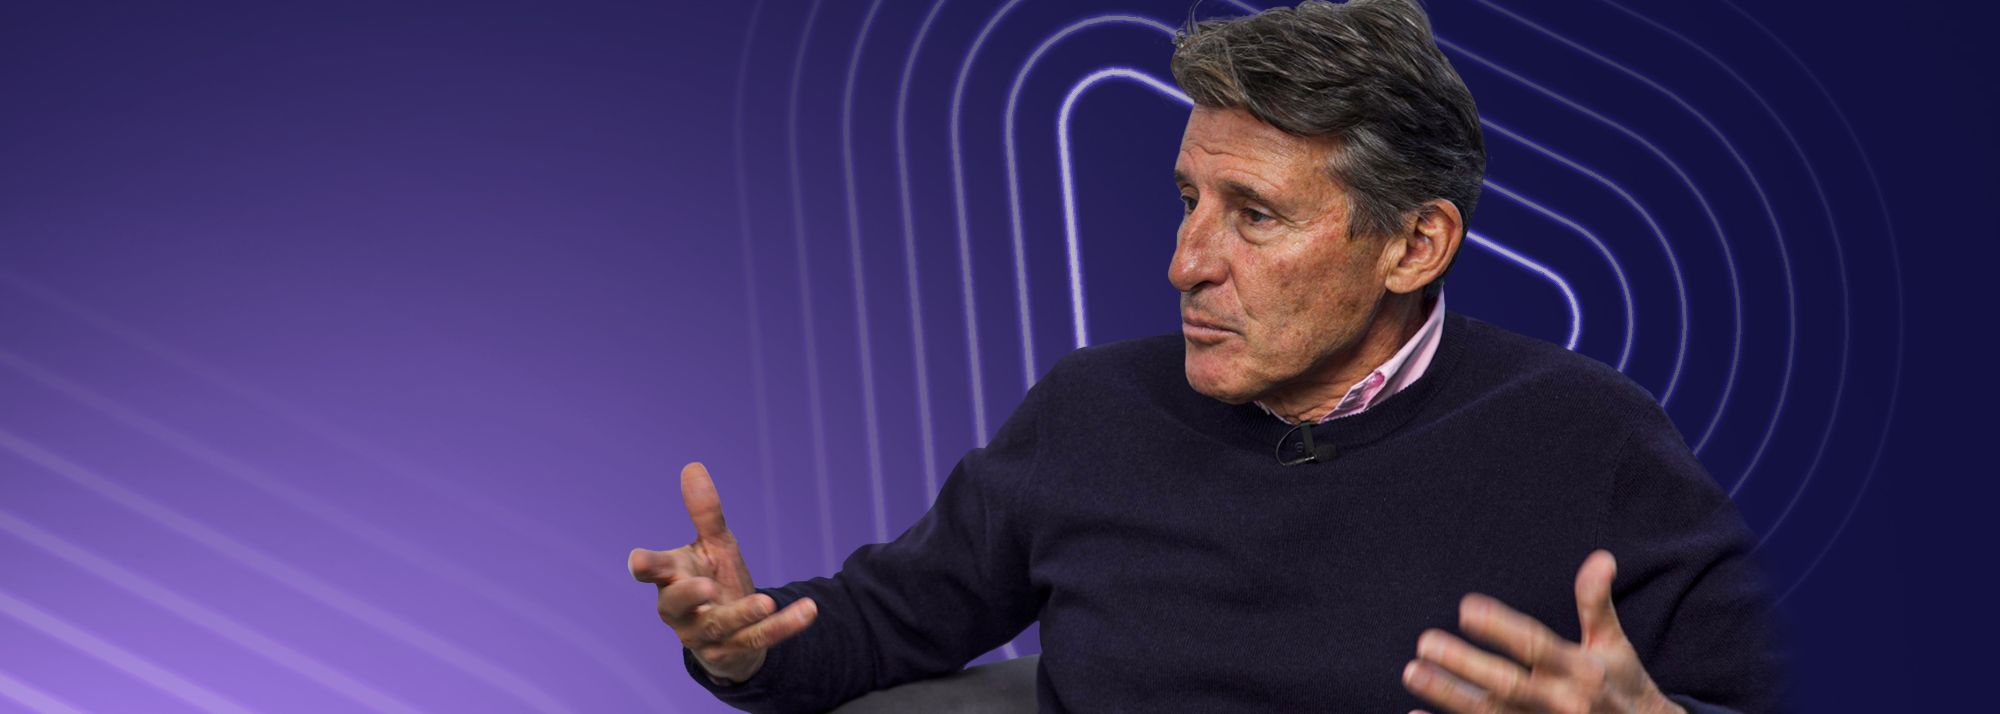 World Athletics President Sebastian Coe opens up on innovation, records, the sport’s profile and Paris in conversation with Sanya Richards-Ross and Richard Kilty